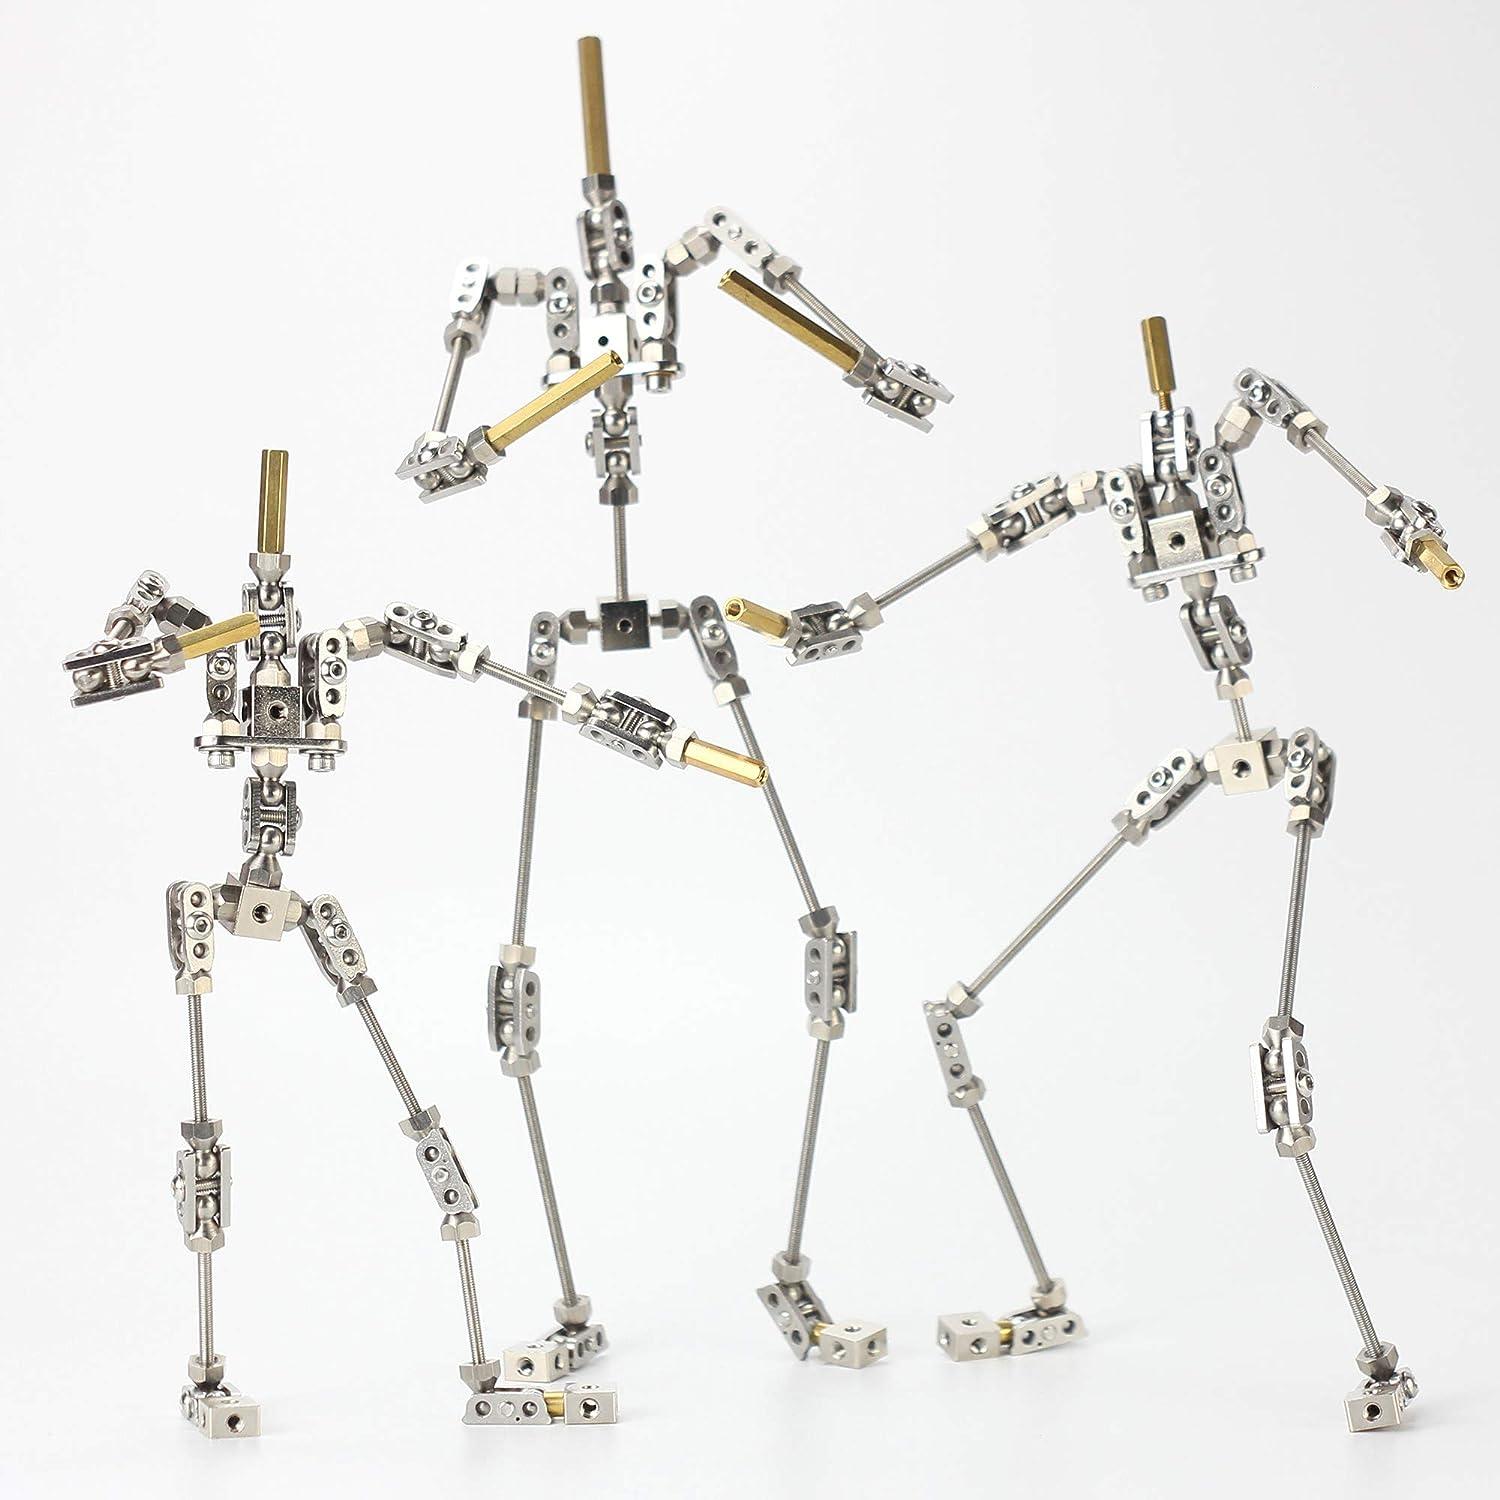 Standard Armature Kit - A ball and socket joint stop motion armature from  Animation Supplies